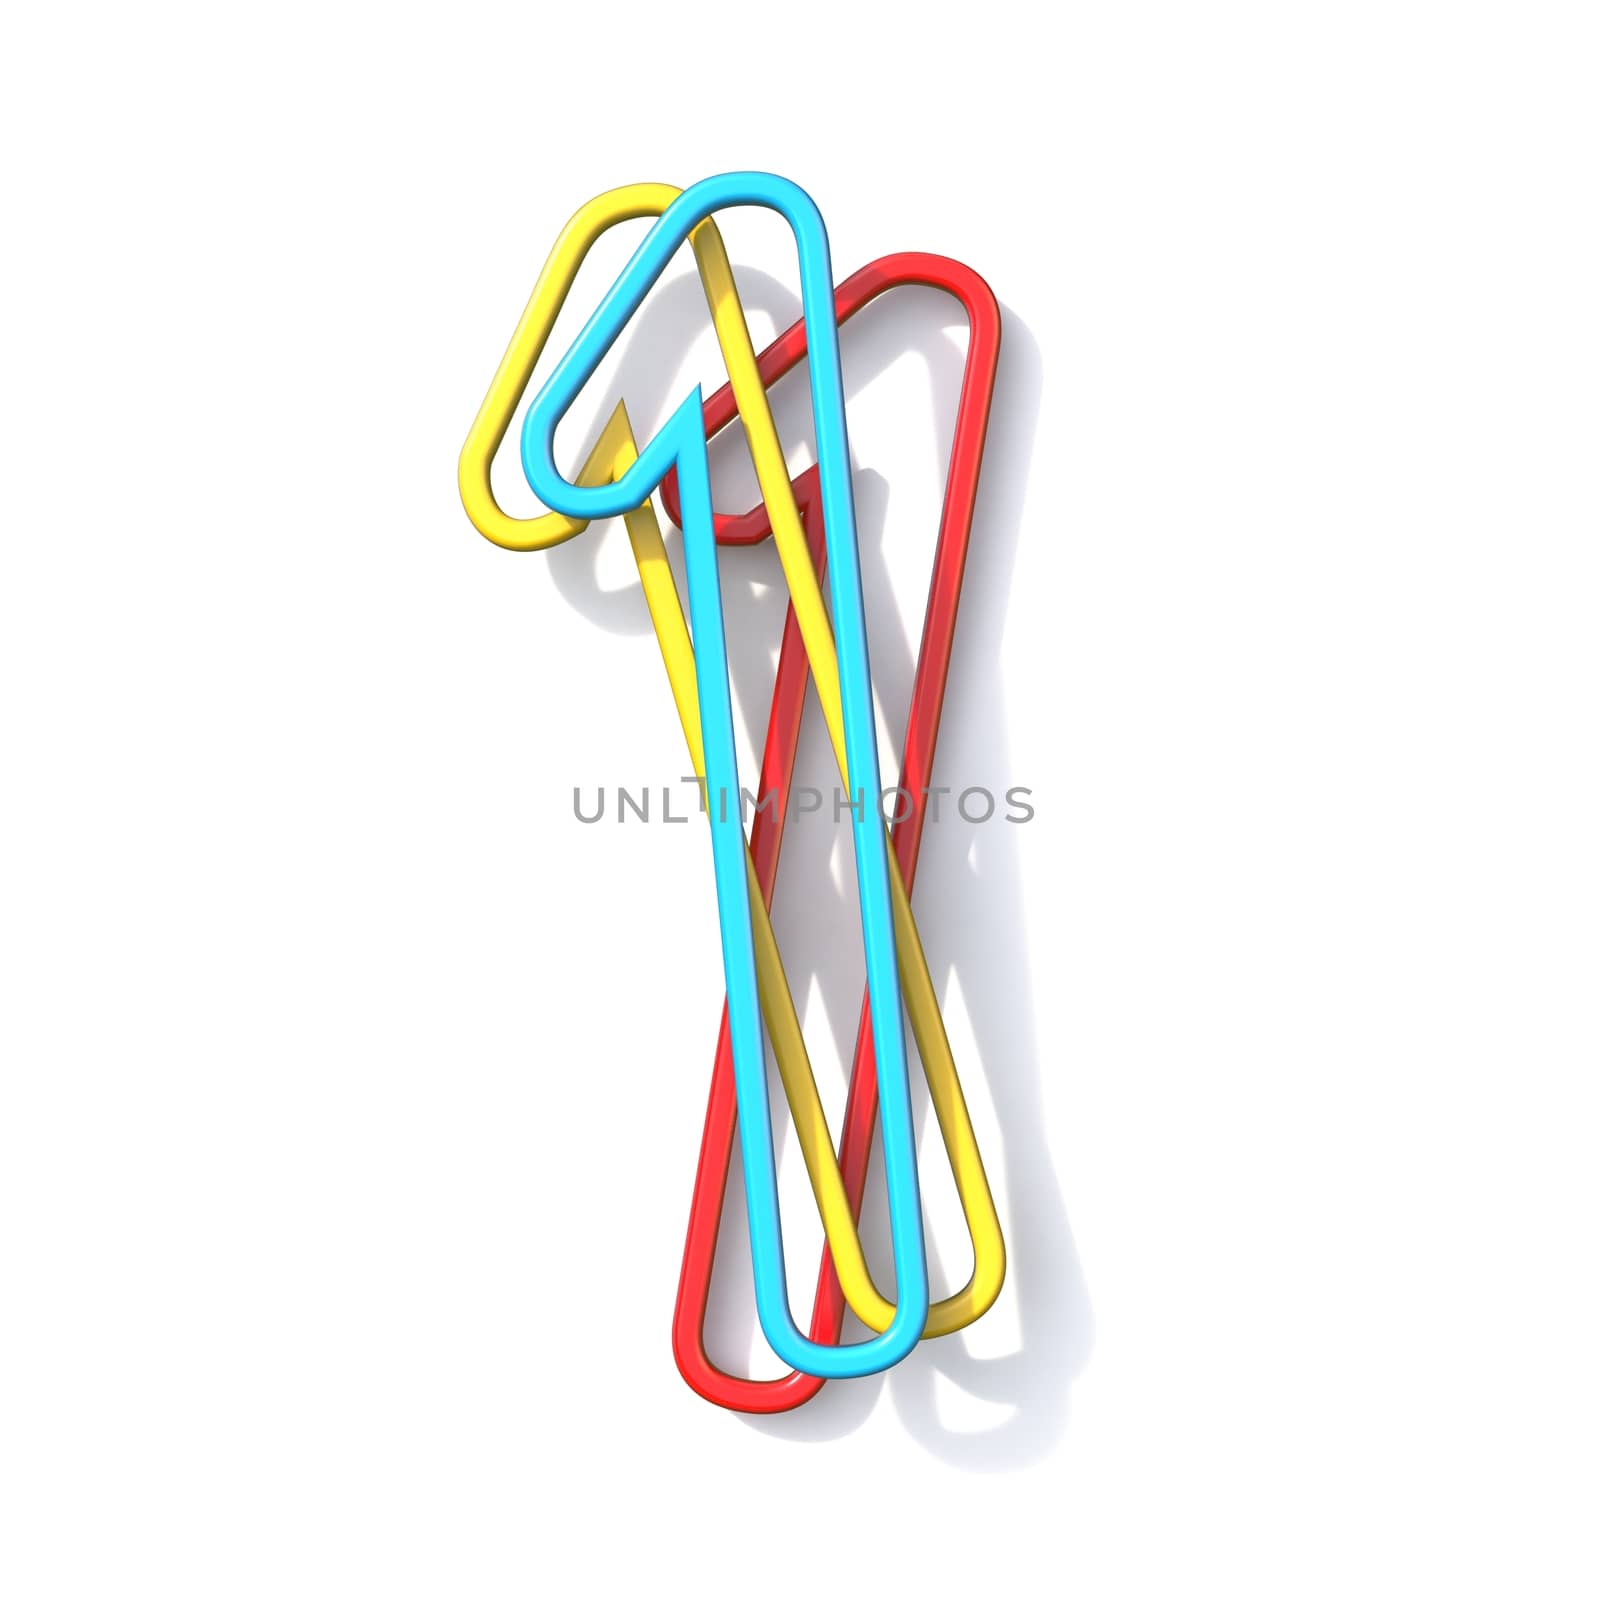 Three basic color wire font number 1 ONE 3D rendering illustration isolated on white background